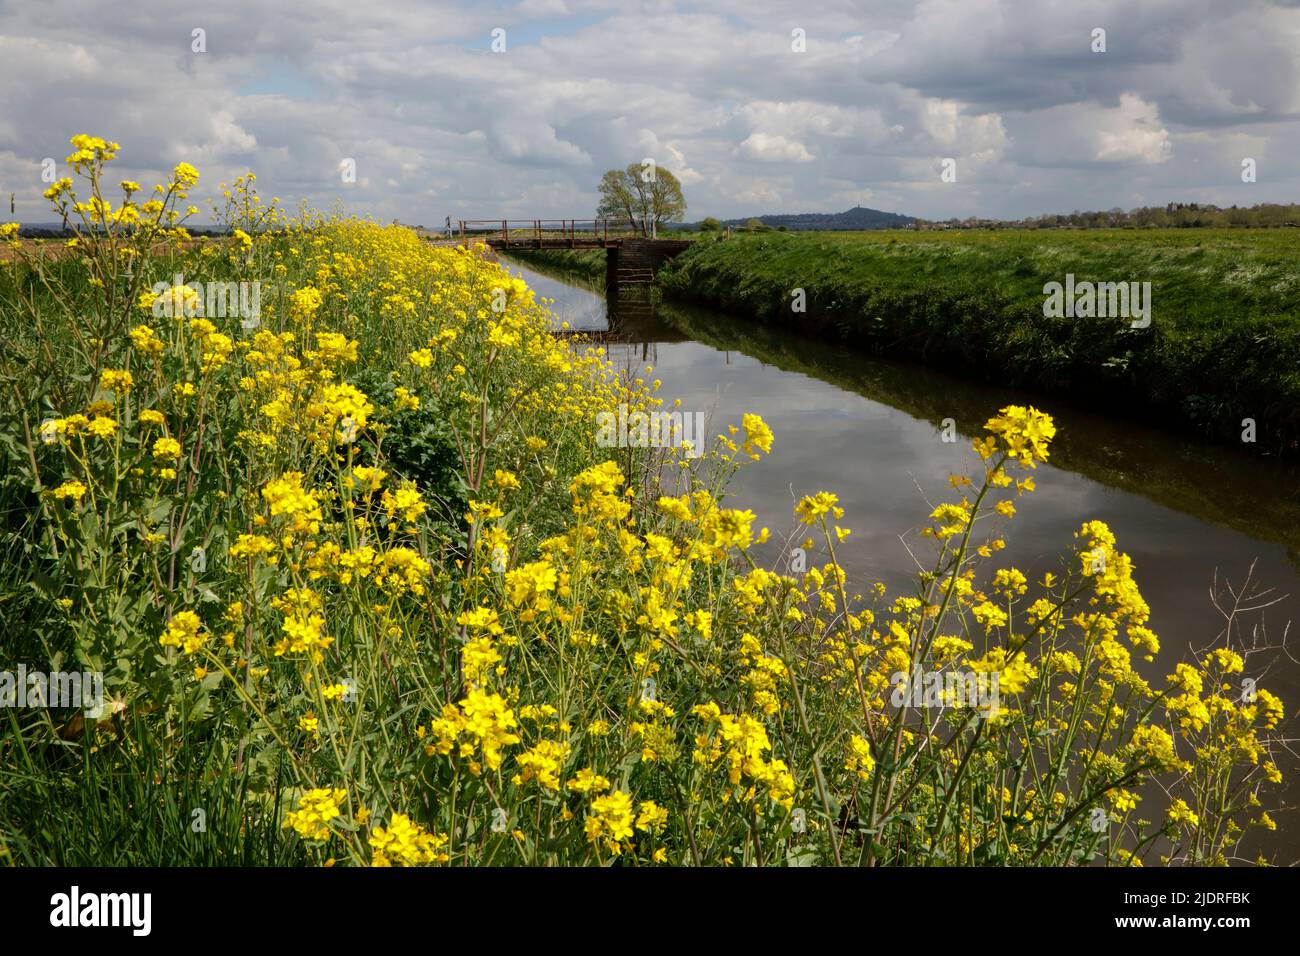 White’s River near Westhay, Somerset Levels, Somerset, England, UK. Glastonbury Tor can be seen in the far distance. Stock Photo